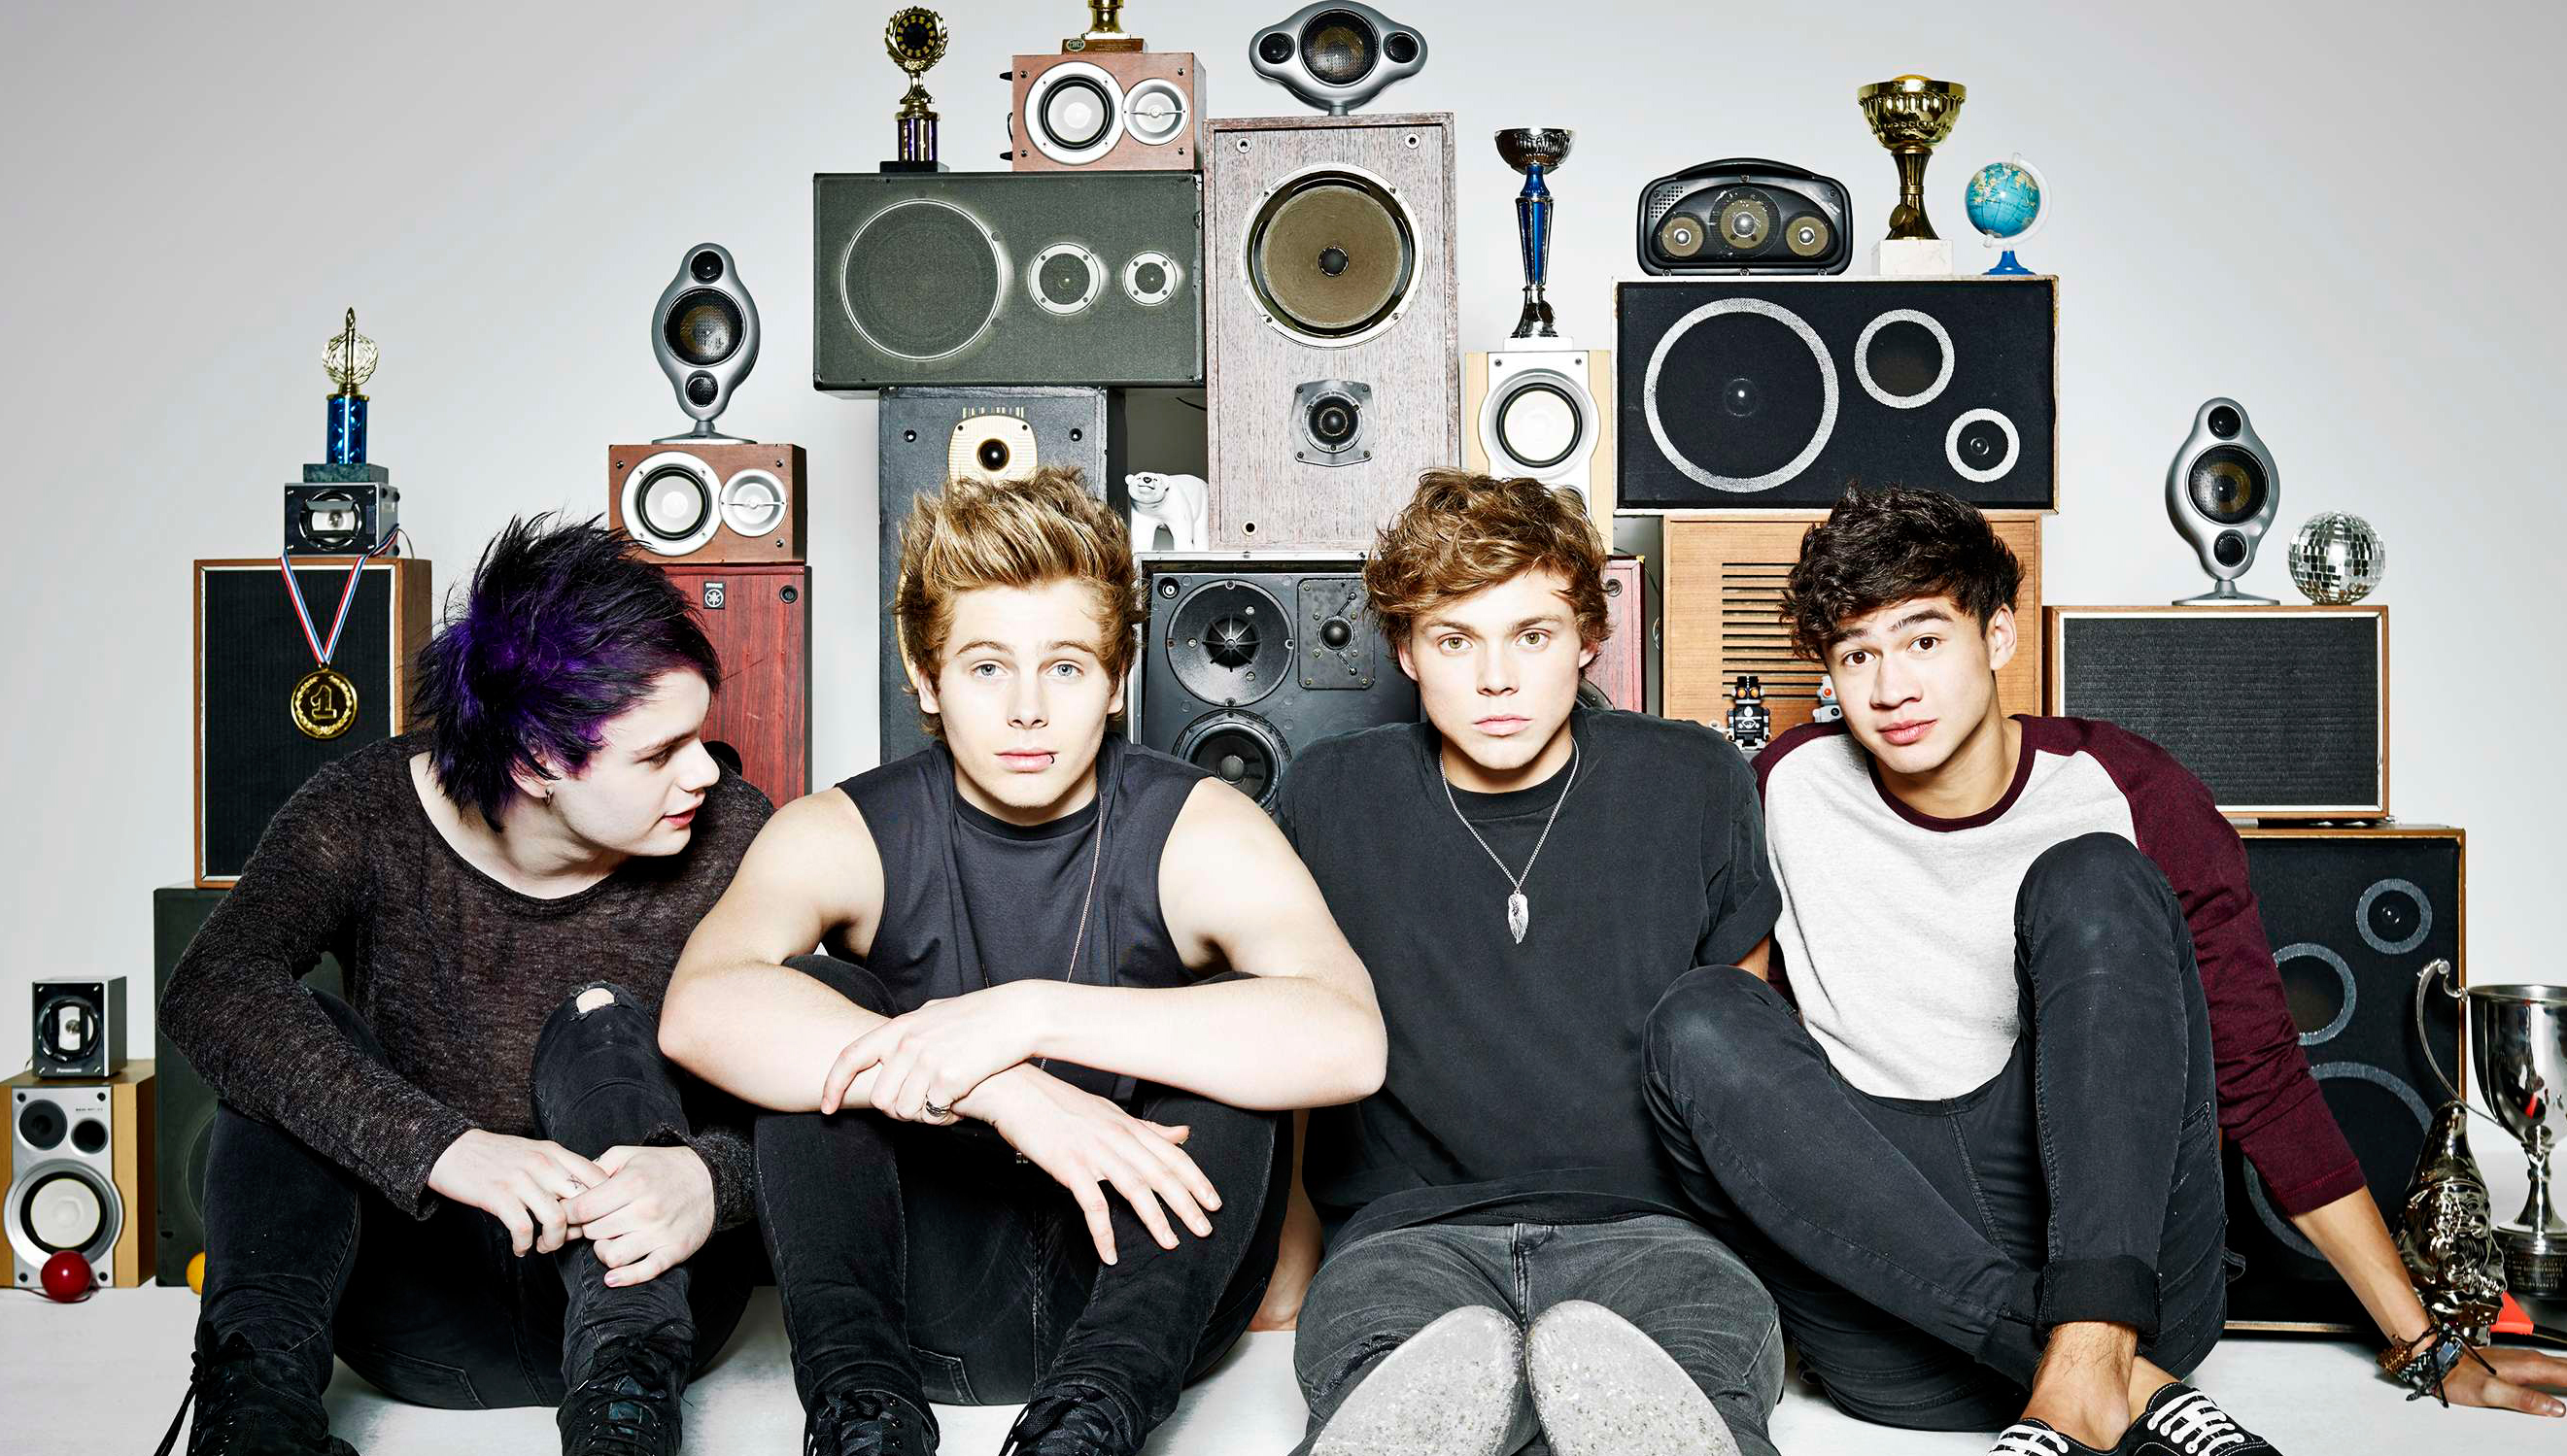 5SOS win “worst band” for second year in NME awards